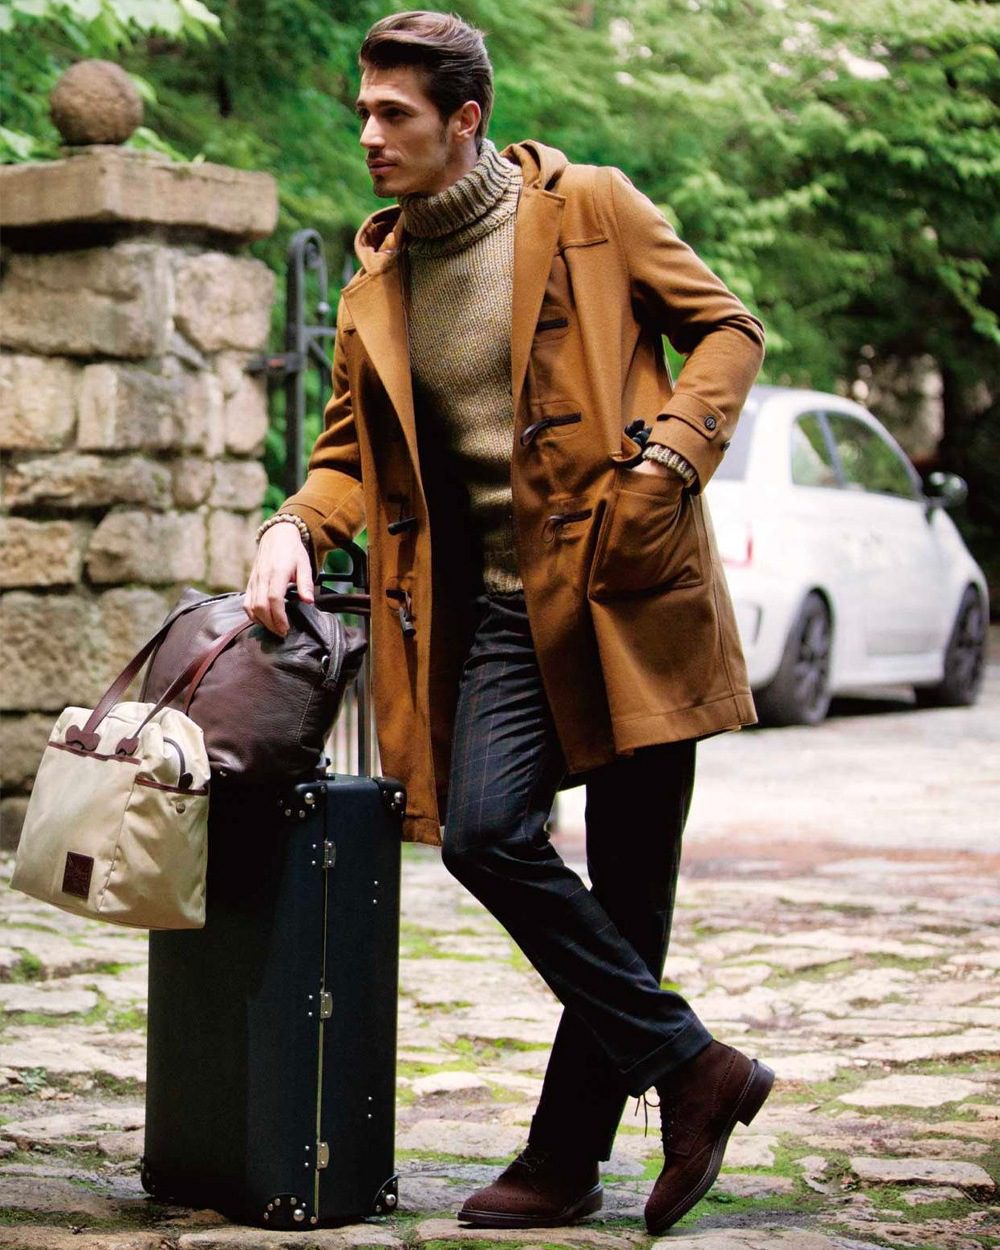 The Top 5 Overcoat Styles For Men (And How To Wear Them)